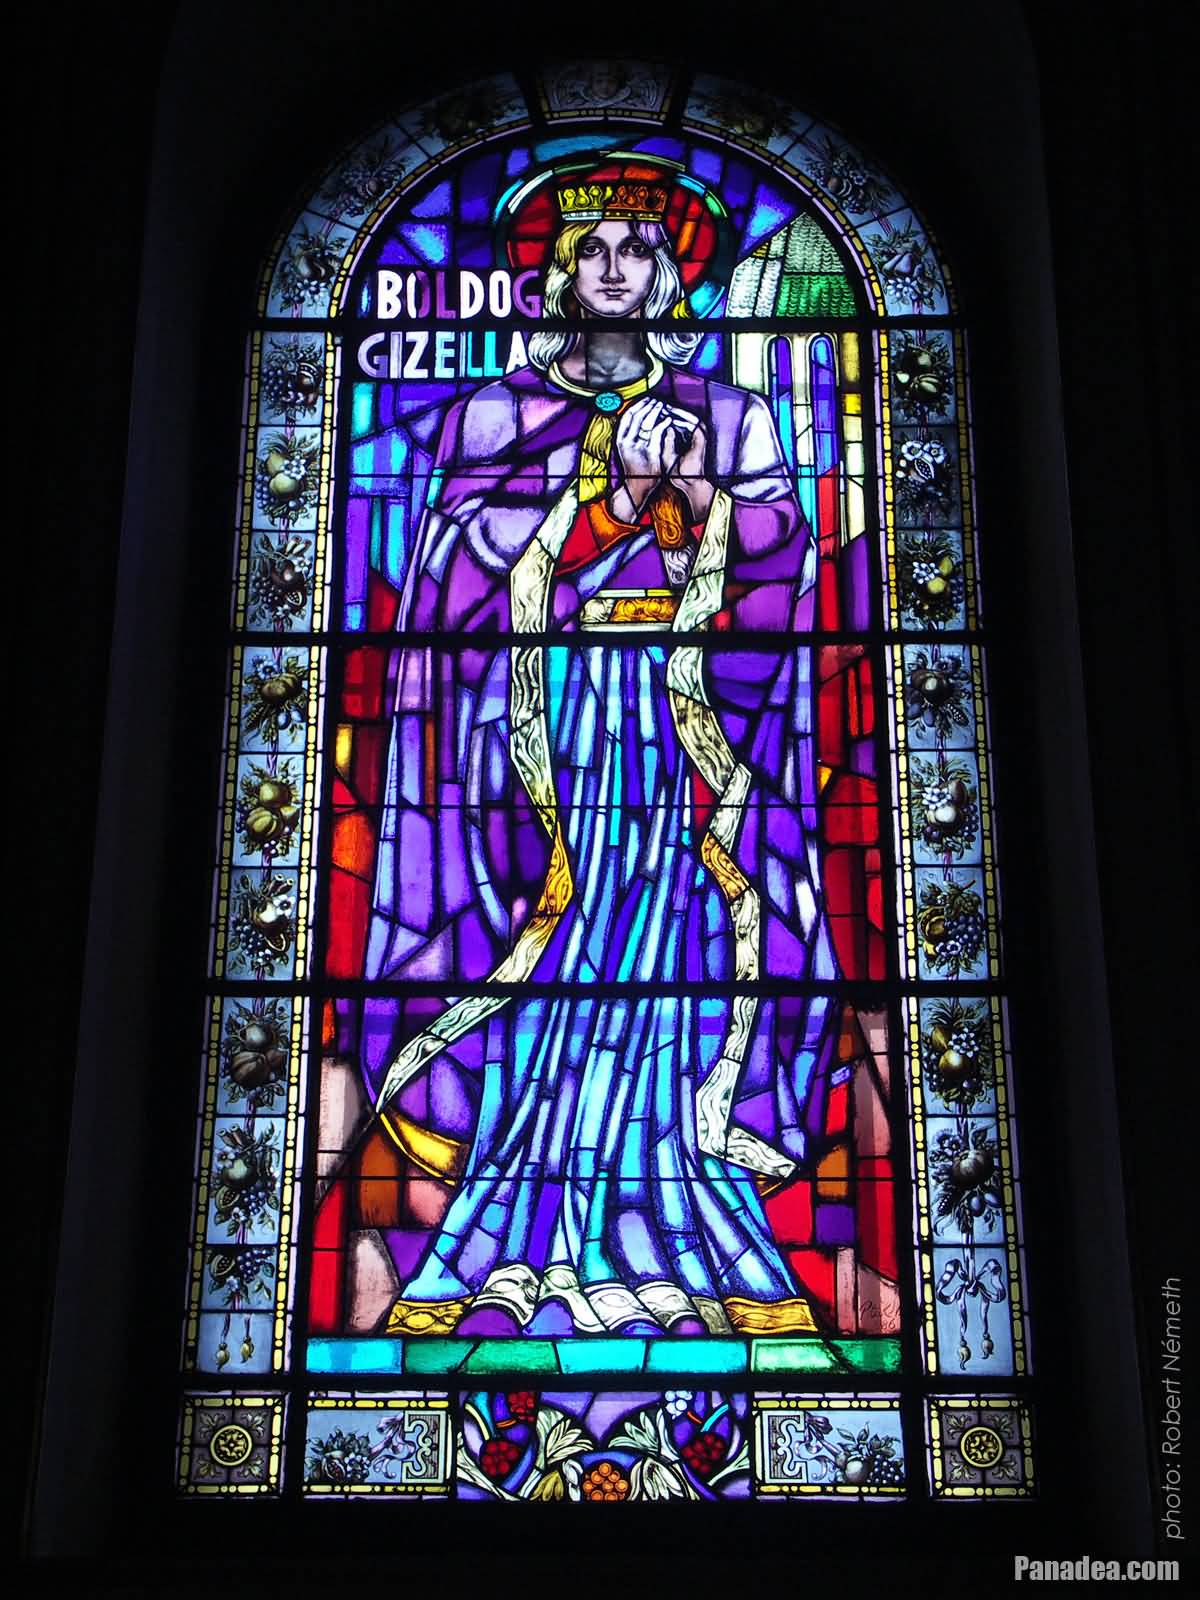 Picture Of Blessed Gisela Queen Of Hungary On A Stained Glass Window Inside The Saint Stephen’s Basilica